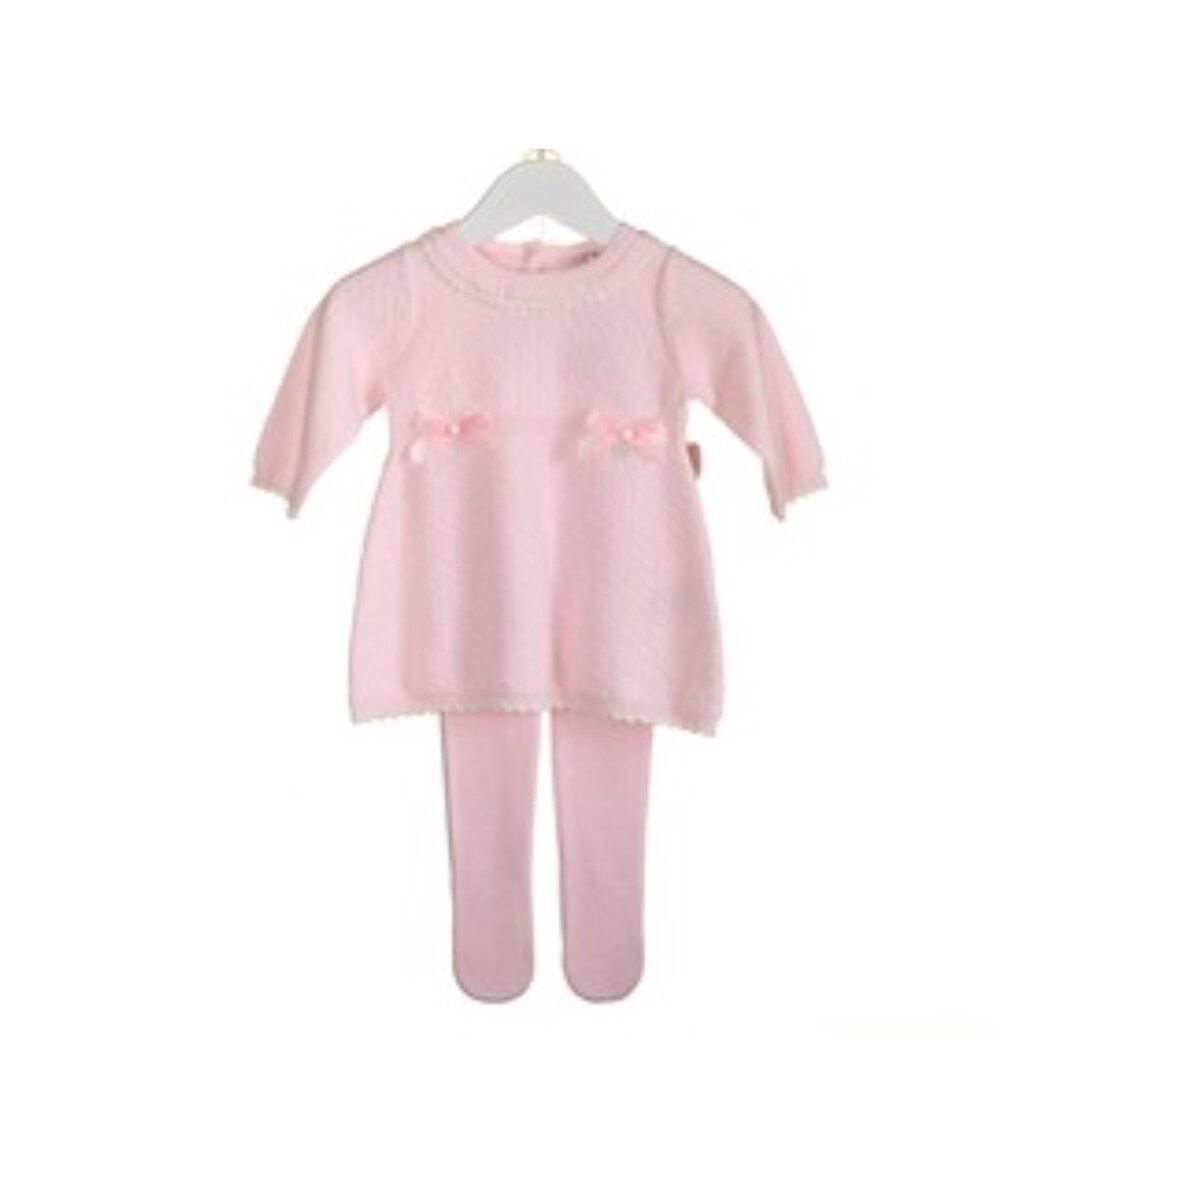 Blues Baby Peter Pan collar Knitted Romper in Pink